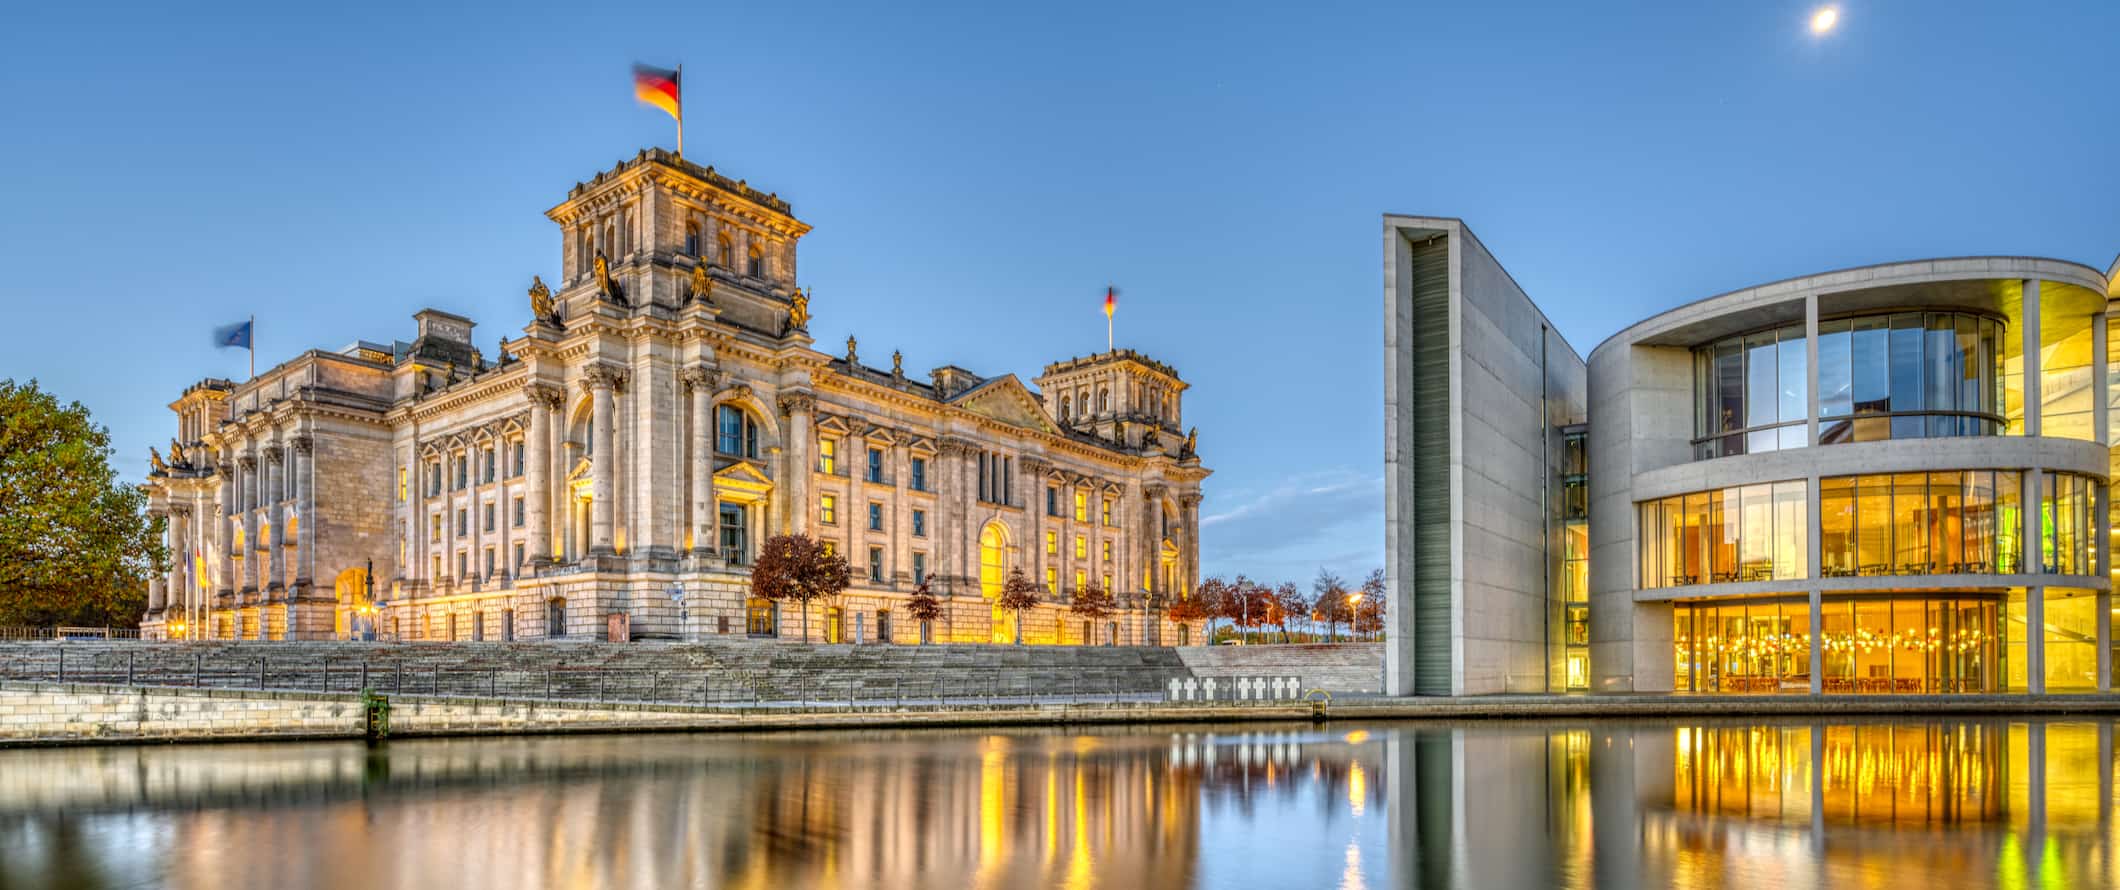 The Reichstag in Berlin, Germany as seen from the water nearby